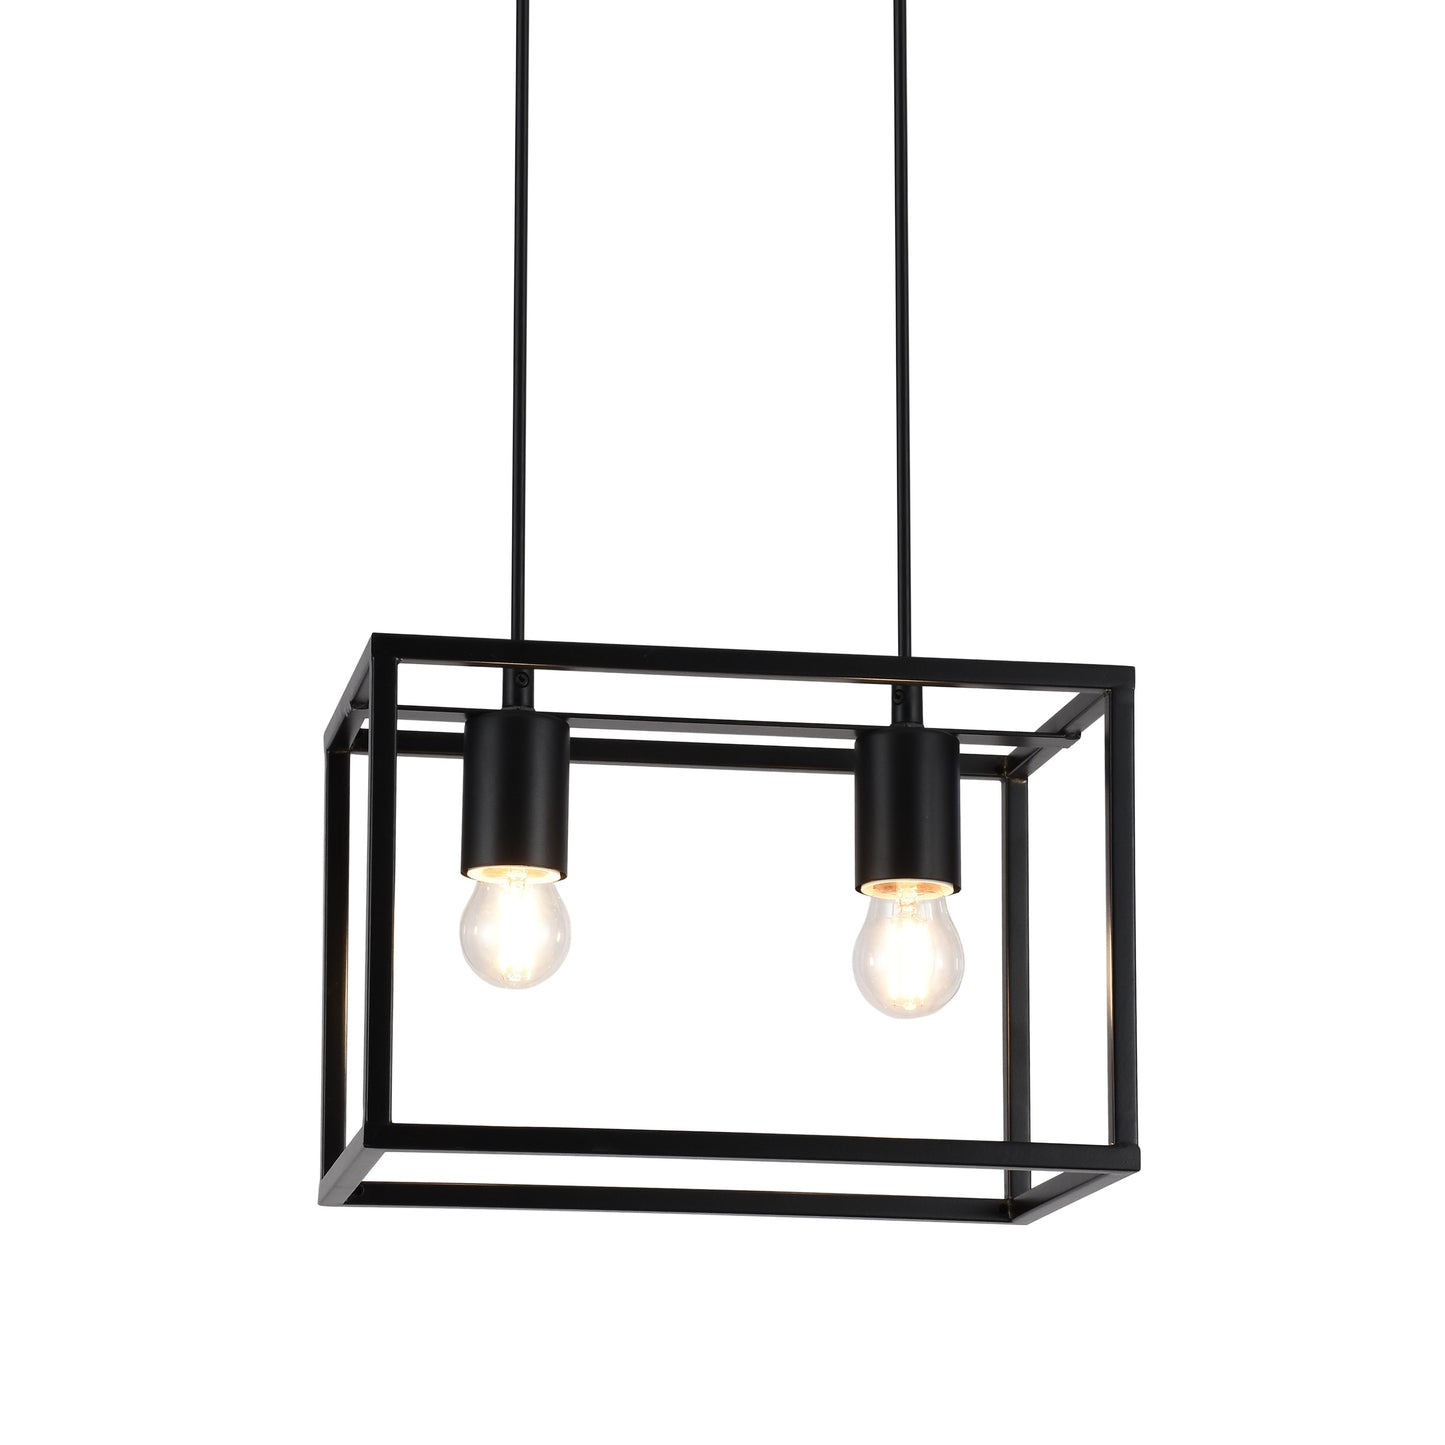  The Molly rectangle ceiling pendant light is a contemporary addition to your home decor. This adjustable black rectangular ceiling pendant light is complimented with 2 light fittings and will add a modern element to any home or commercial property, Would look great positioned over a bar, kitchen island or dining table The adjustable height makes it perfect for any space, helping you customise the lighting to your home or commercial property.